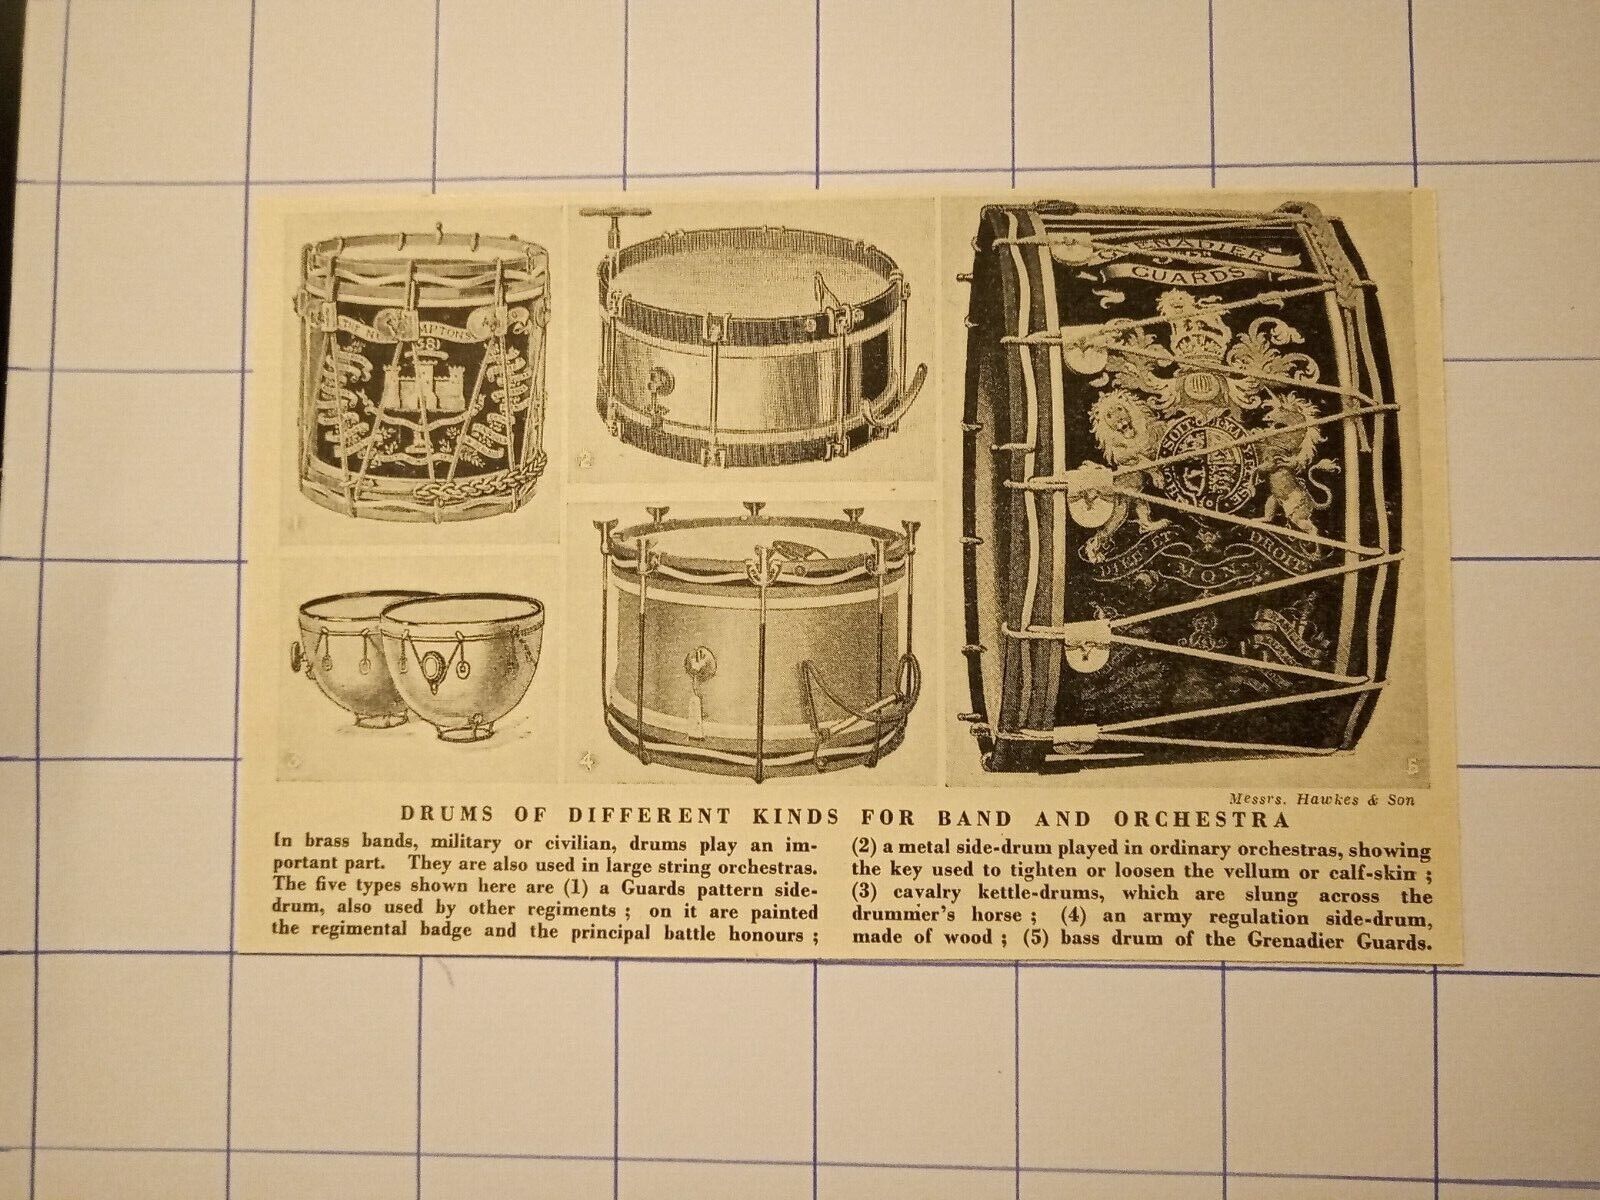  Drums of different kinds for and orchestra  c 1950 